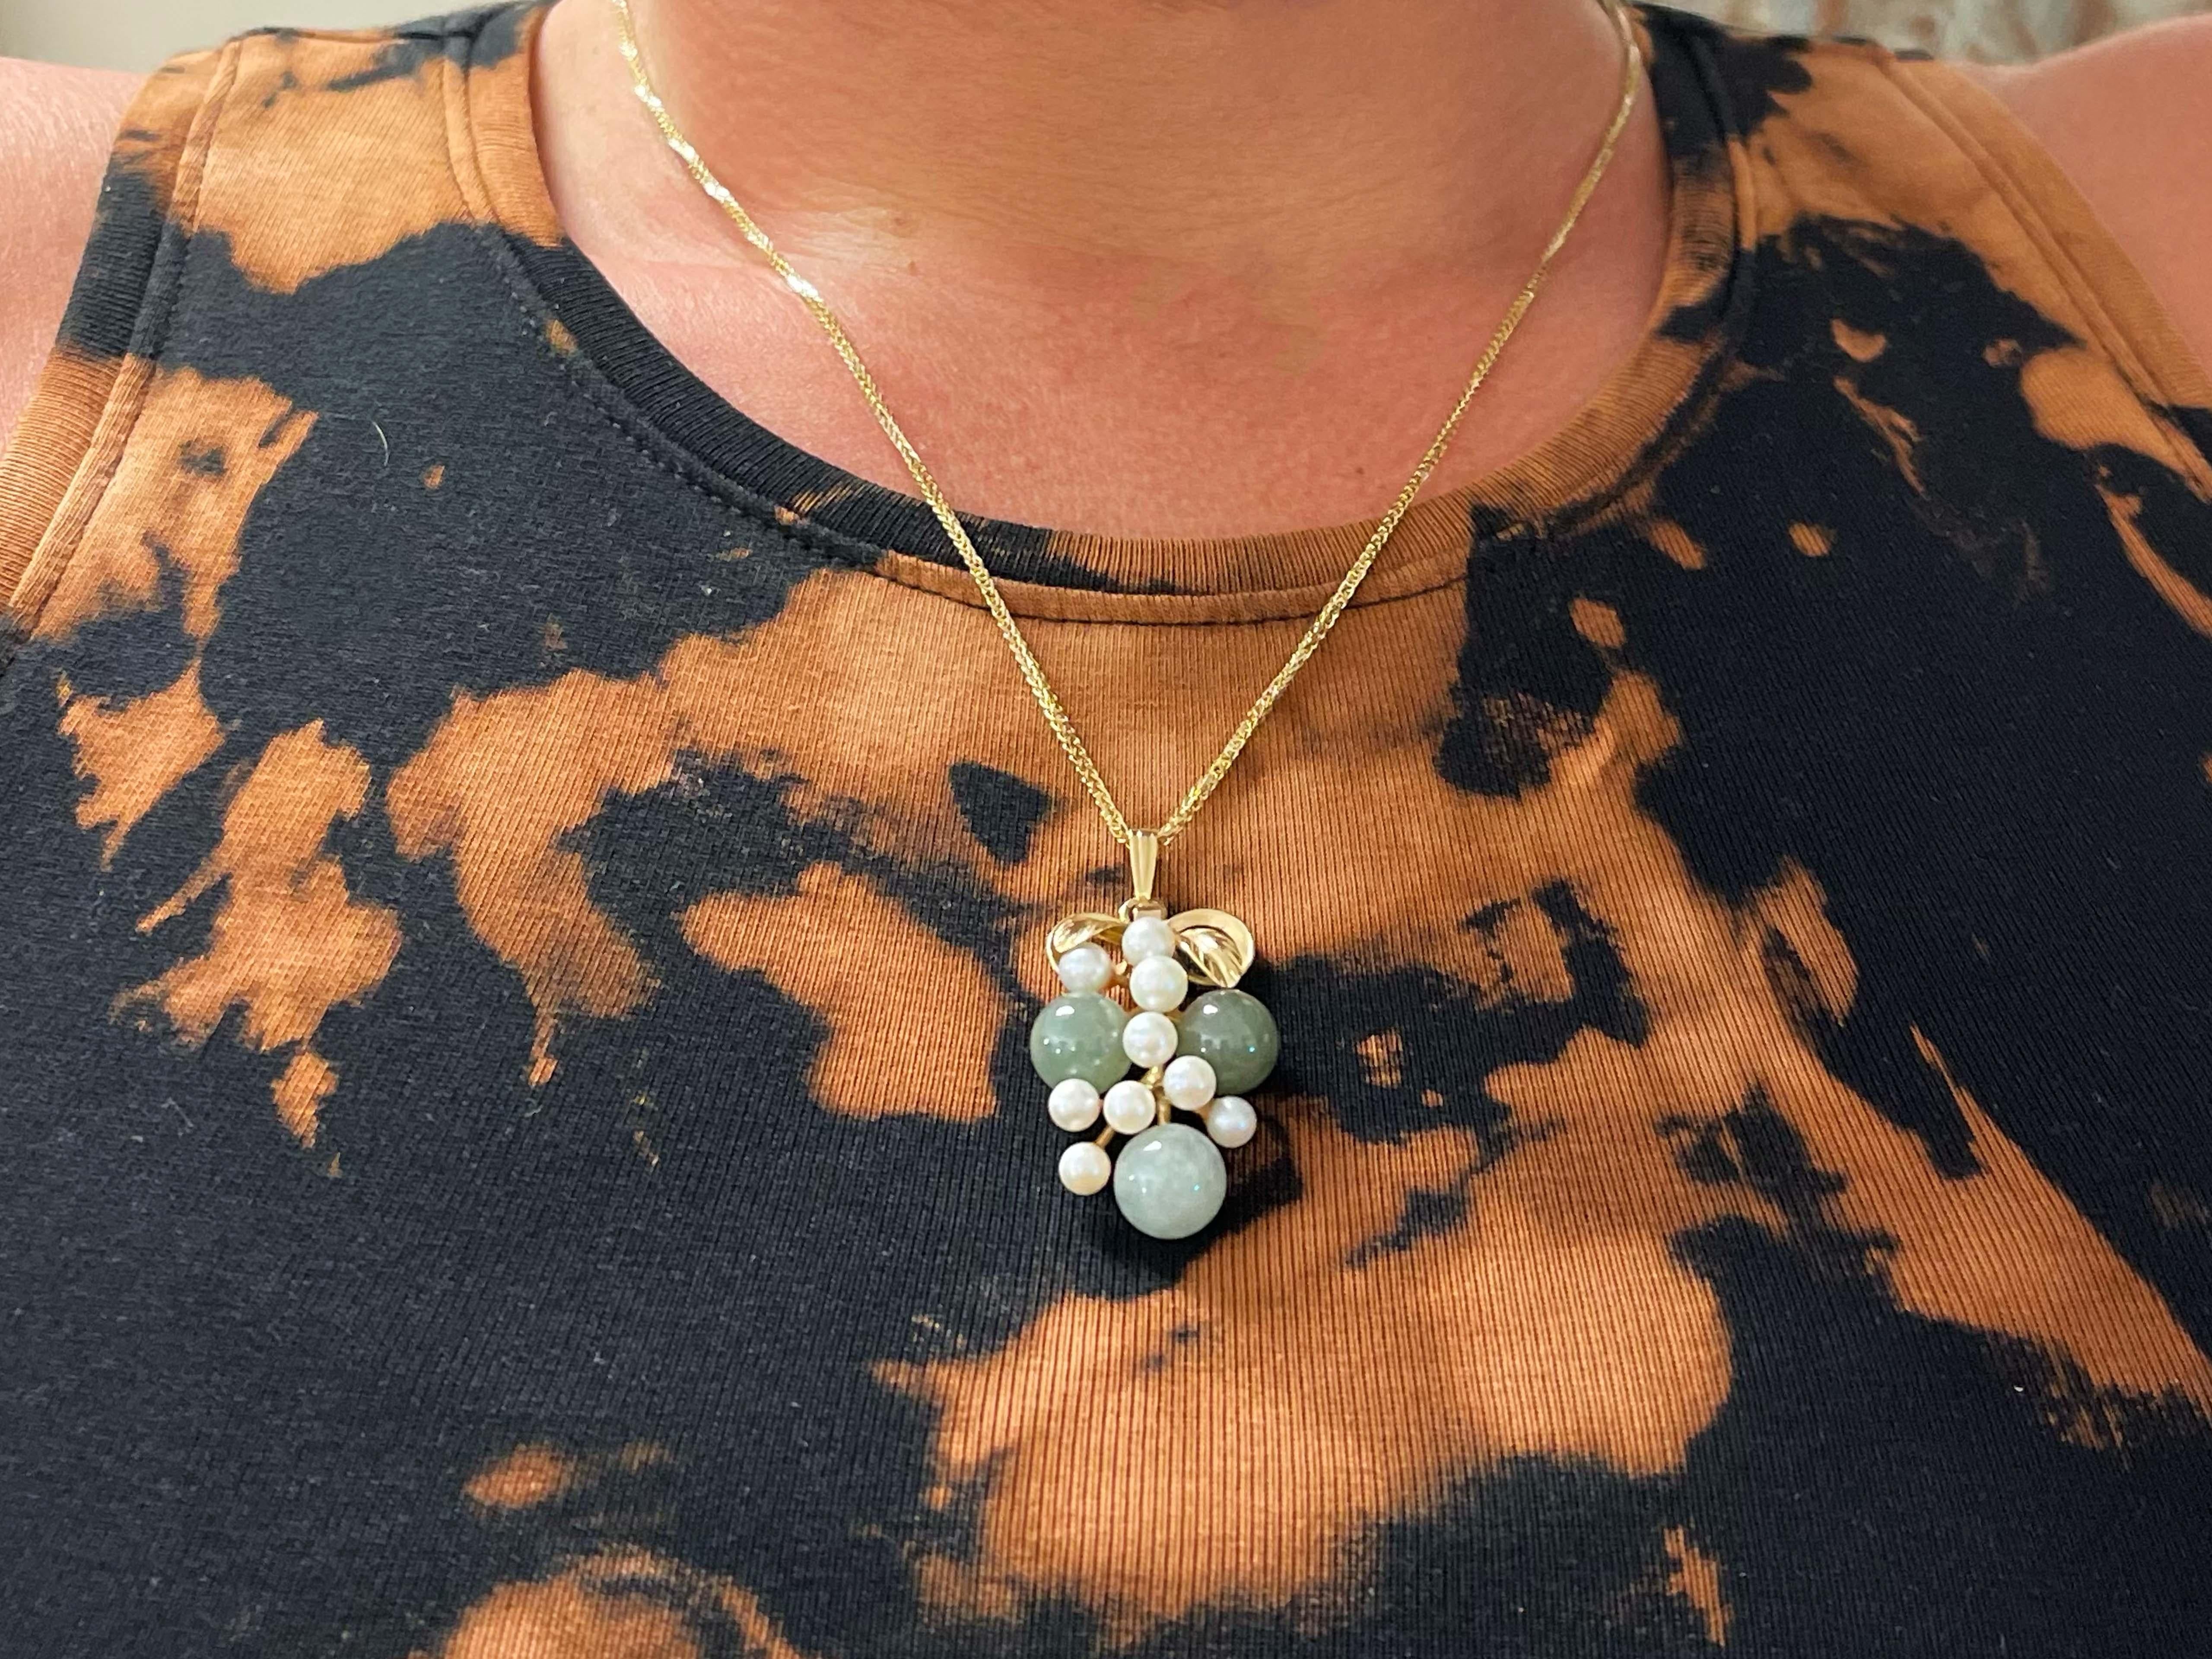 Item Specifications:

Metal: 14k Yellow Gold

Gemstone Specifications:

Gemstone: Jade

Color: green

Cut: round
​
​Second Gemstone: Akoya Pearl

Chain Length: 20